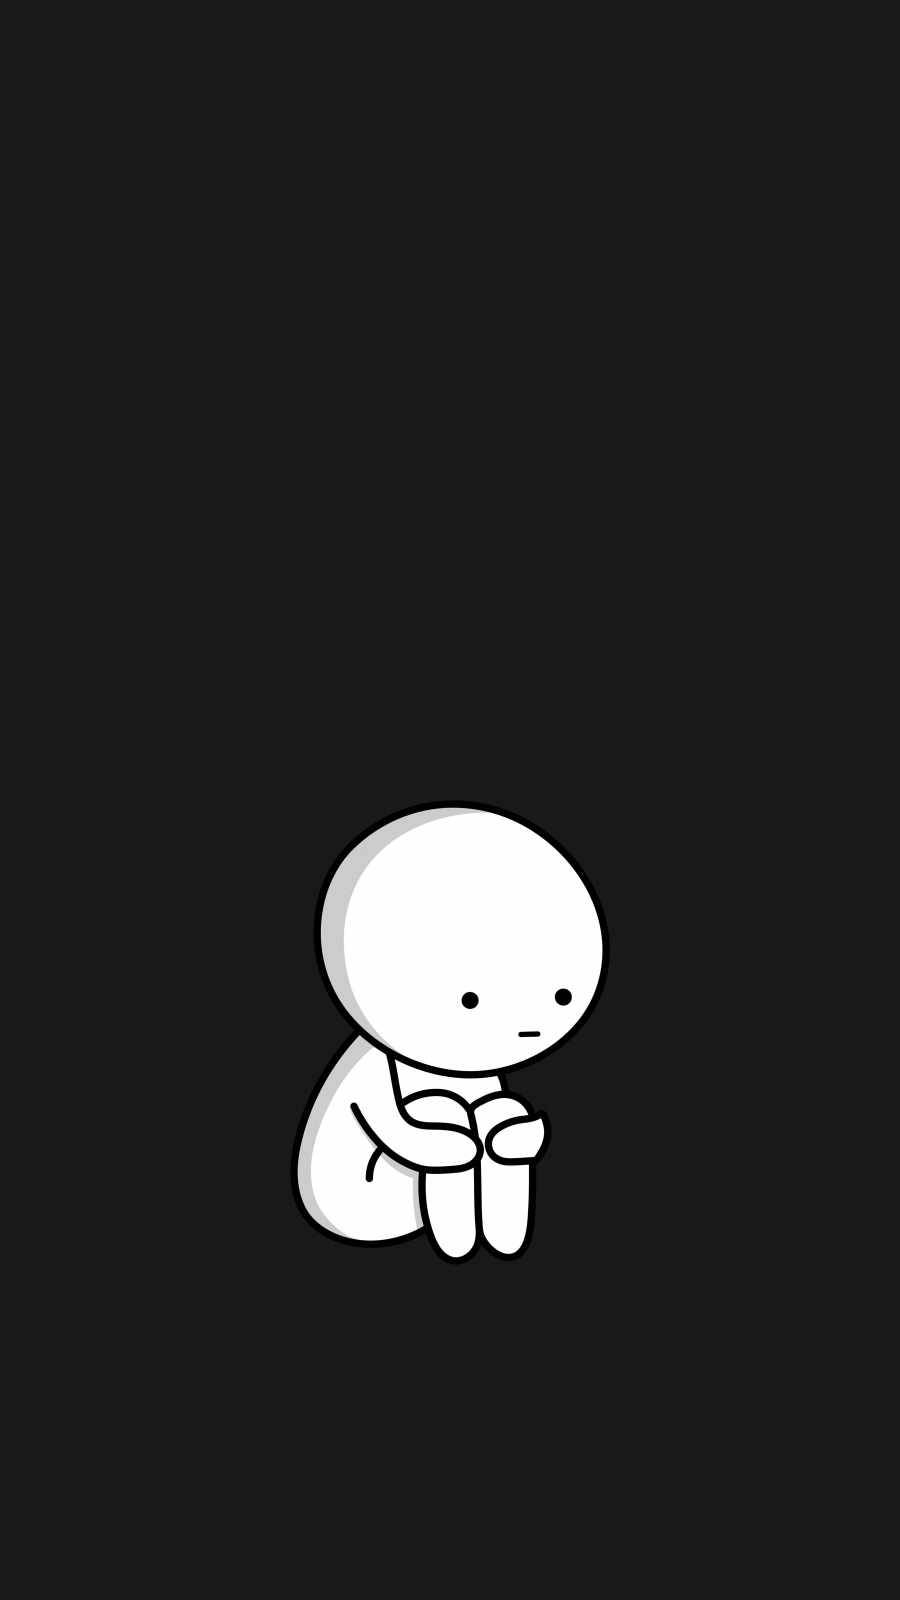 Sad & Lonely Person Iphone Background